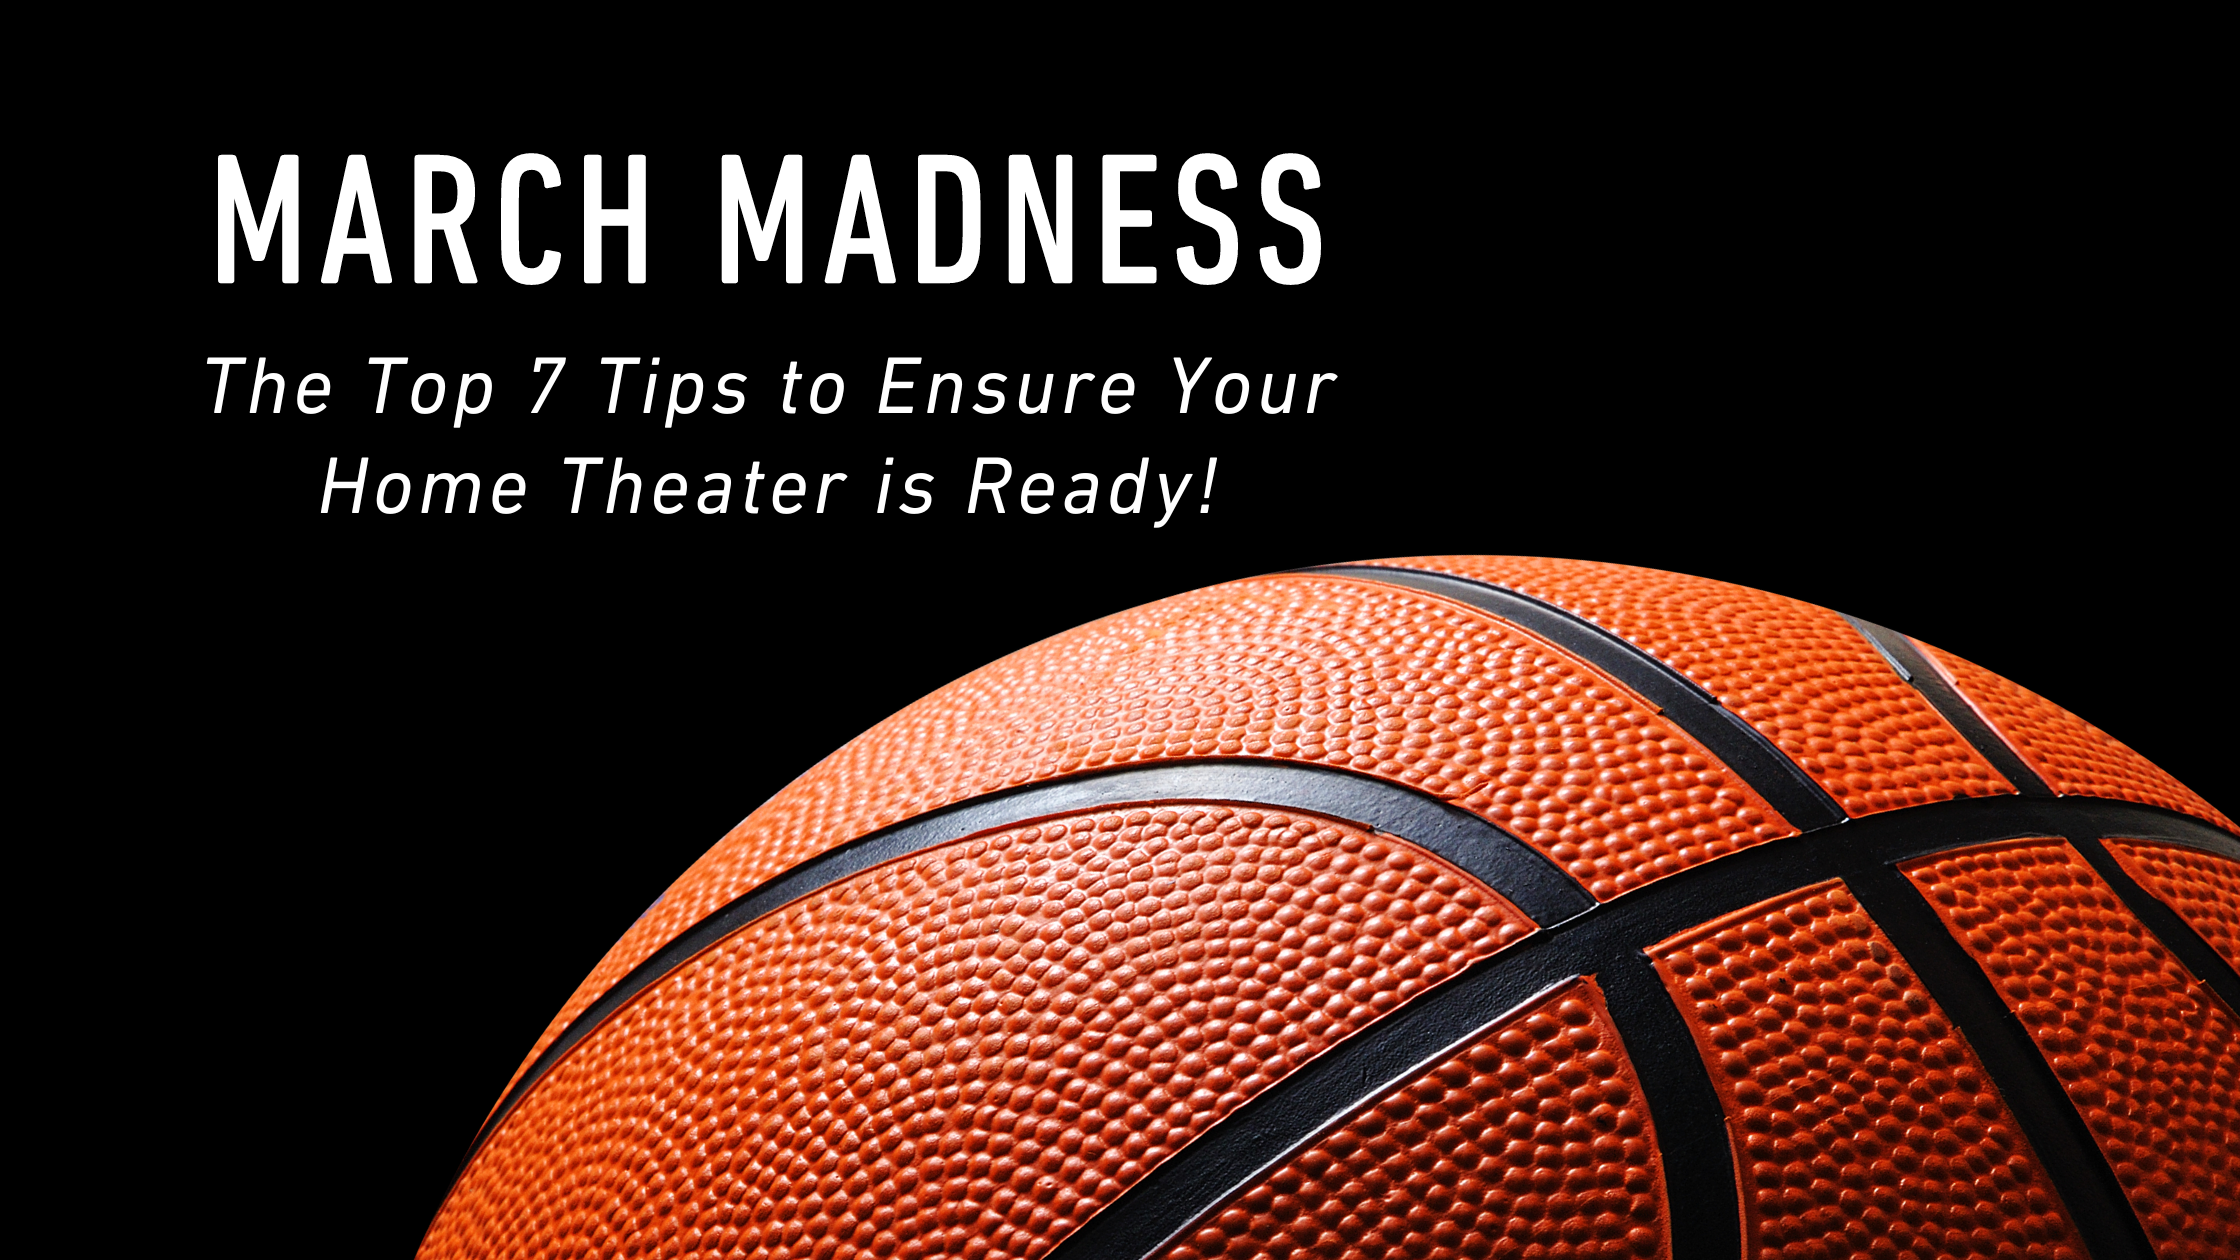 The Top 7 Tips to Ensure Your Home Theater is Ready for March Madness!